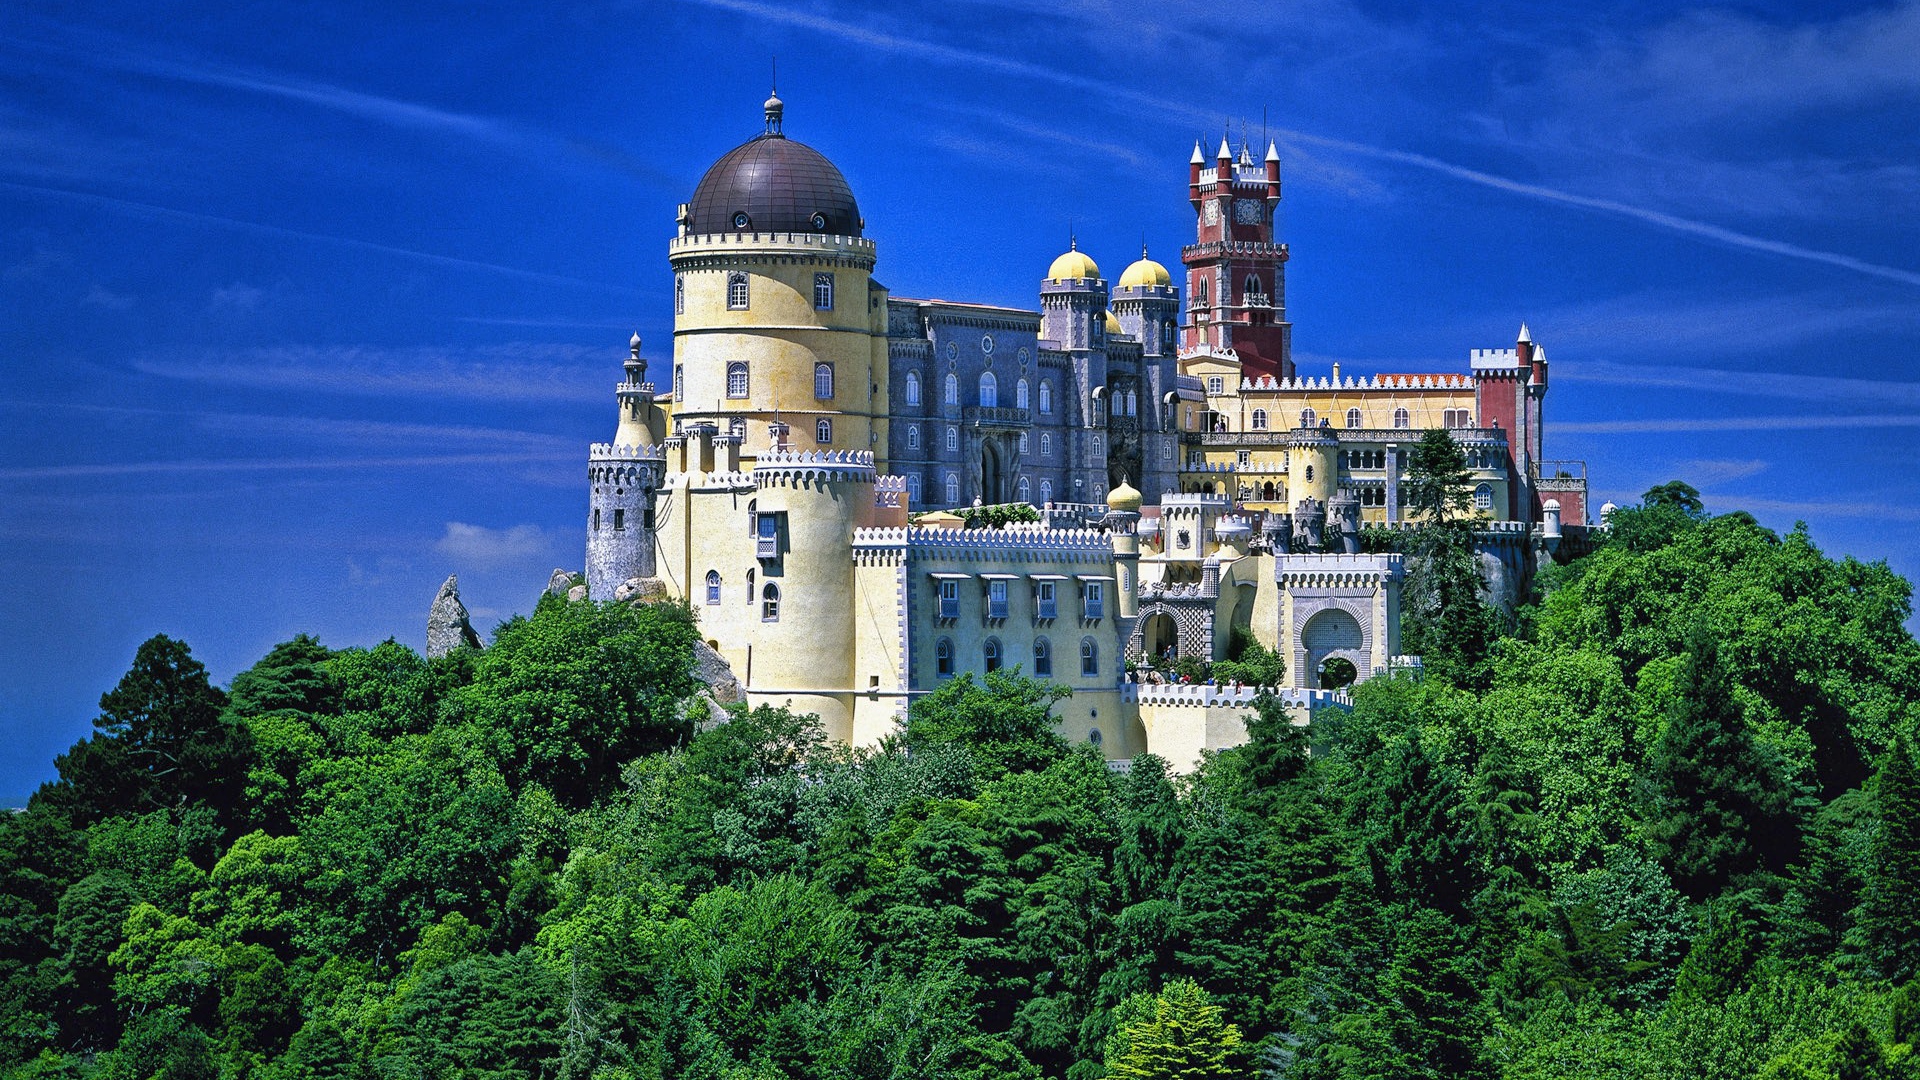 Fairy-tale castle on a hill among the trees